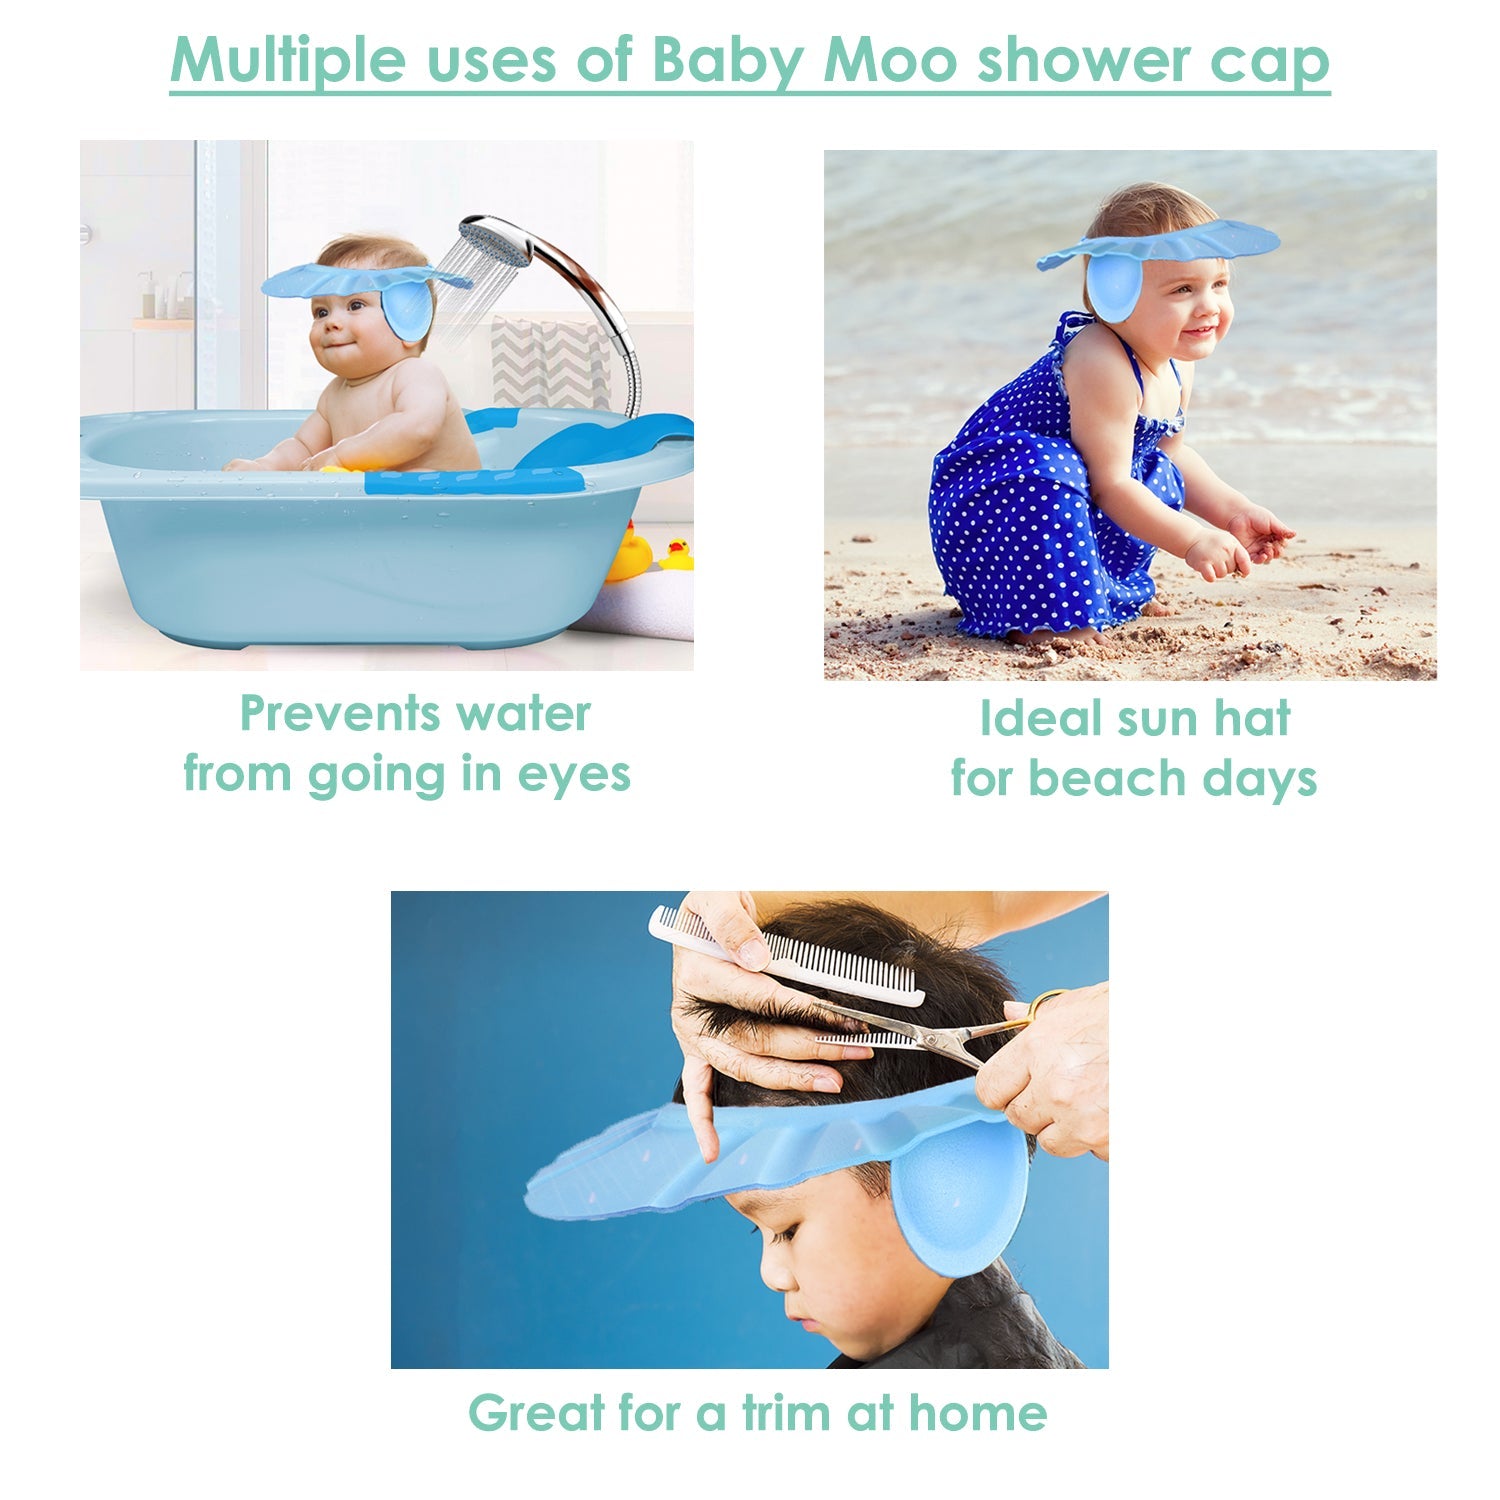 Baby Moo No Tears Safe Adjustable Bathing Shower Cap Pack of 2 - Yellow, Blue